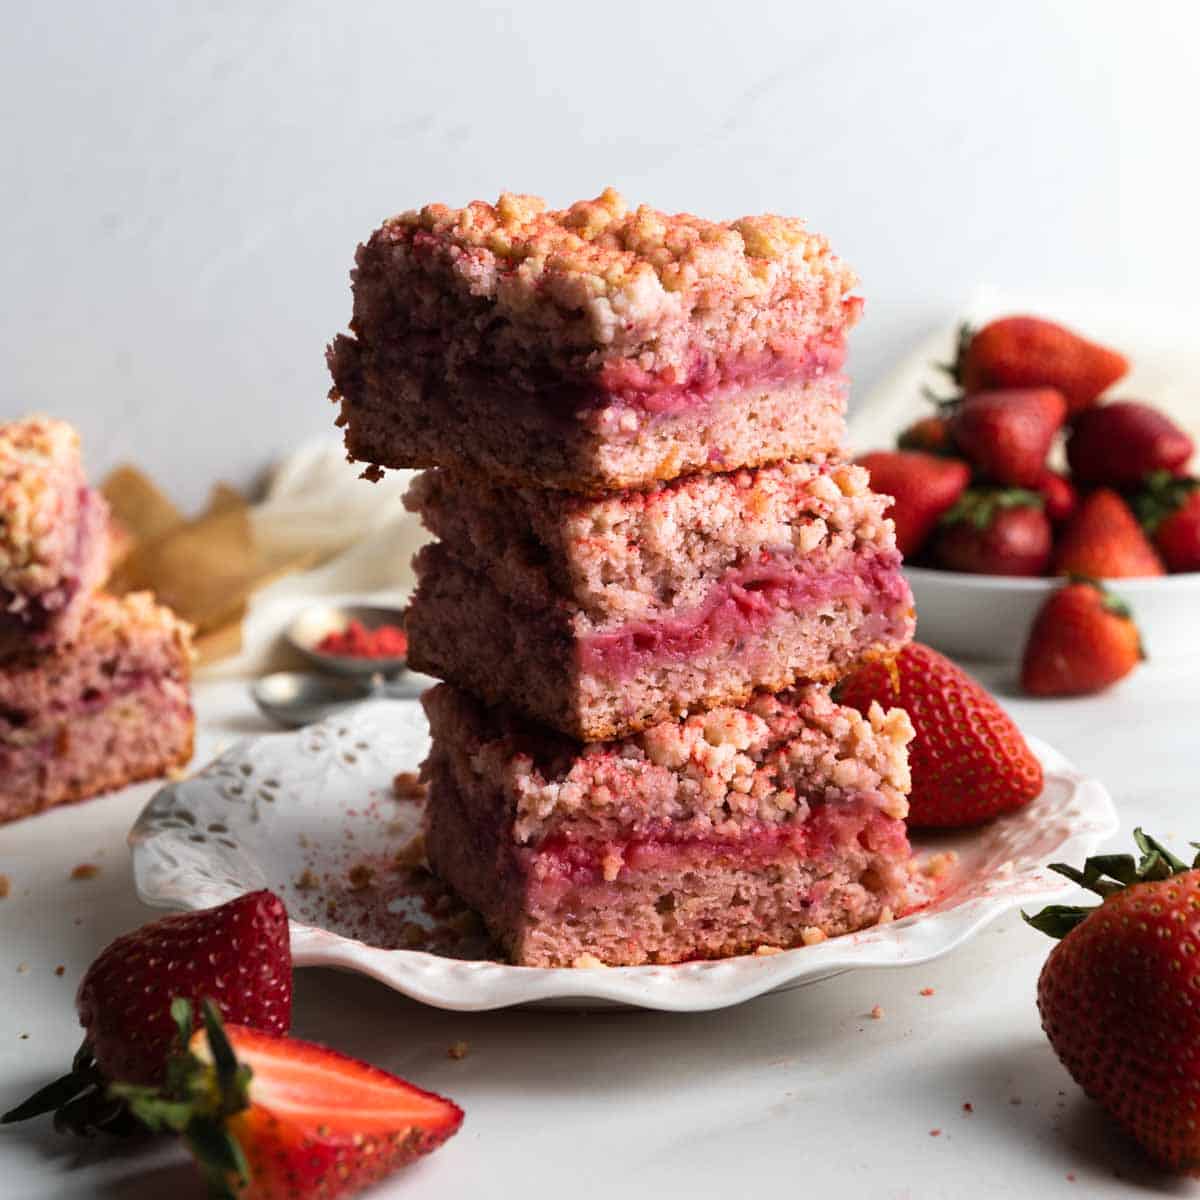 A stack of square slices of strawberry cake and fresh strawberries